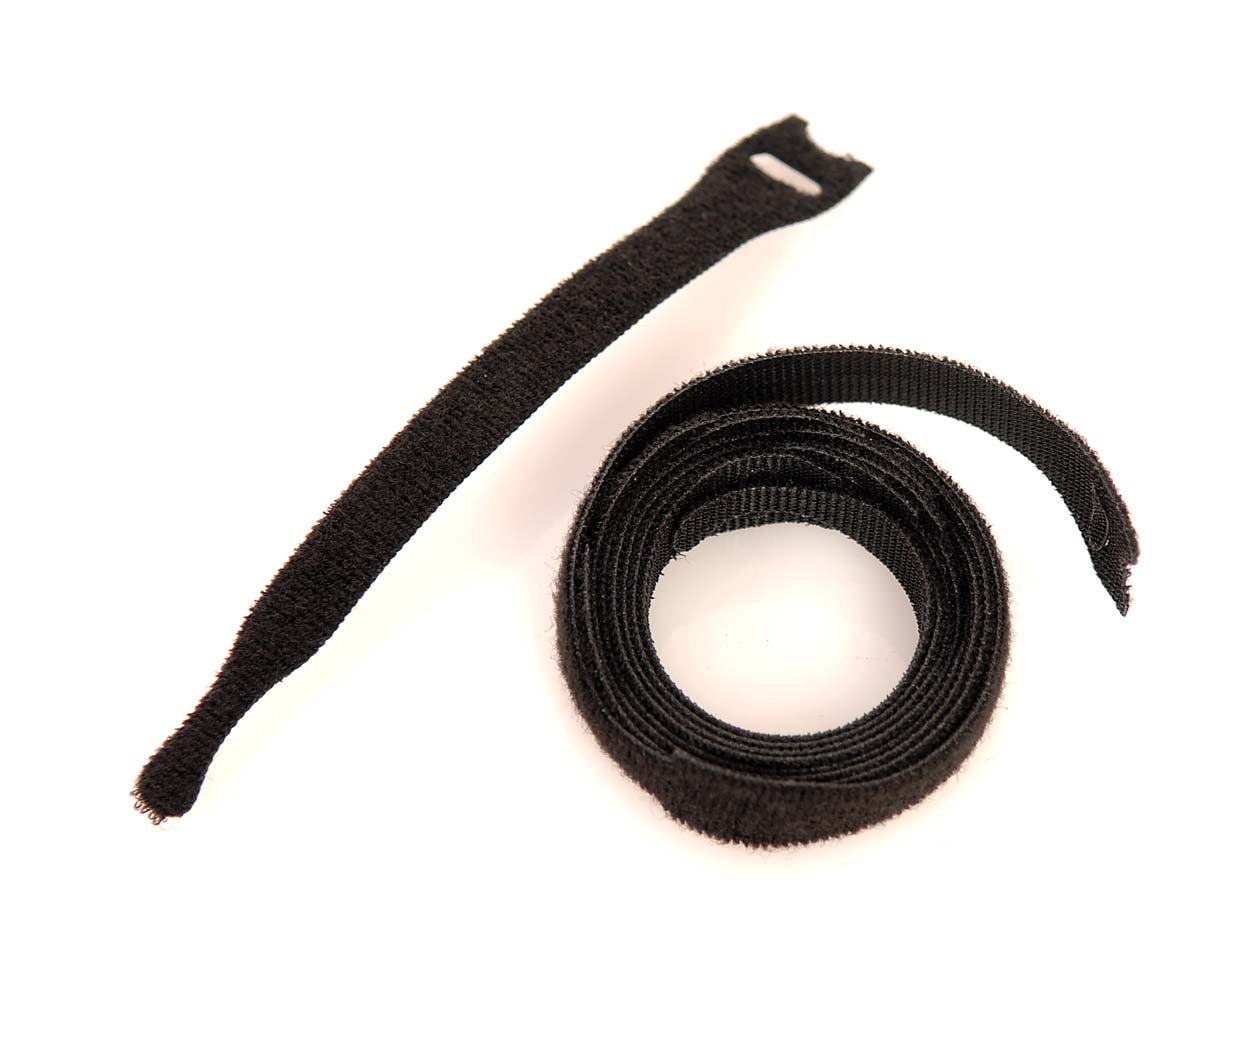 VELCRO® Brand ONE-WRAP® Reusable Cable Ties 20mm x 200mm x 750